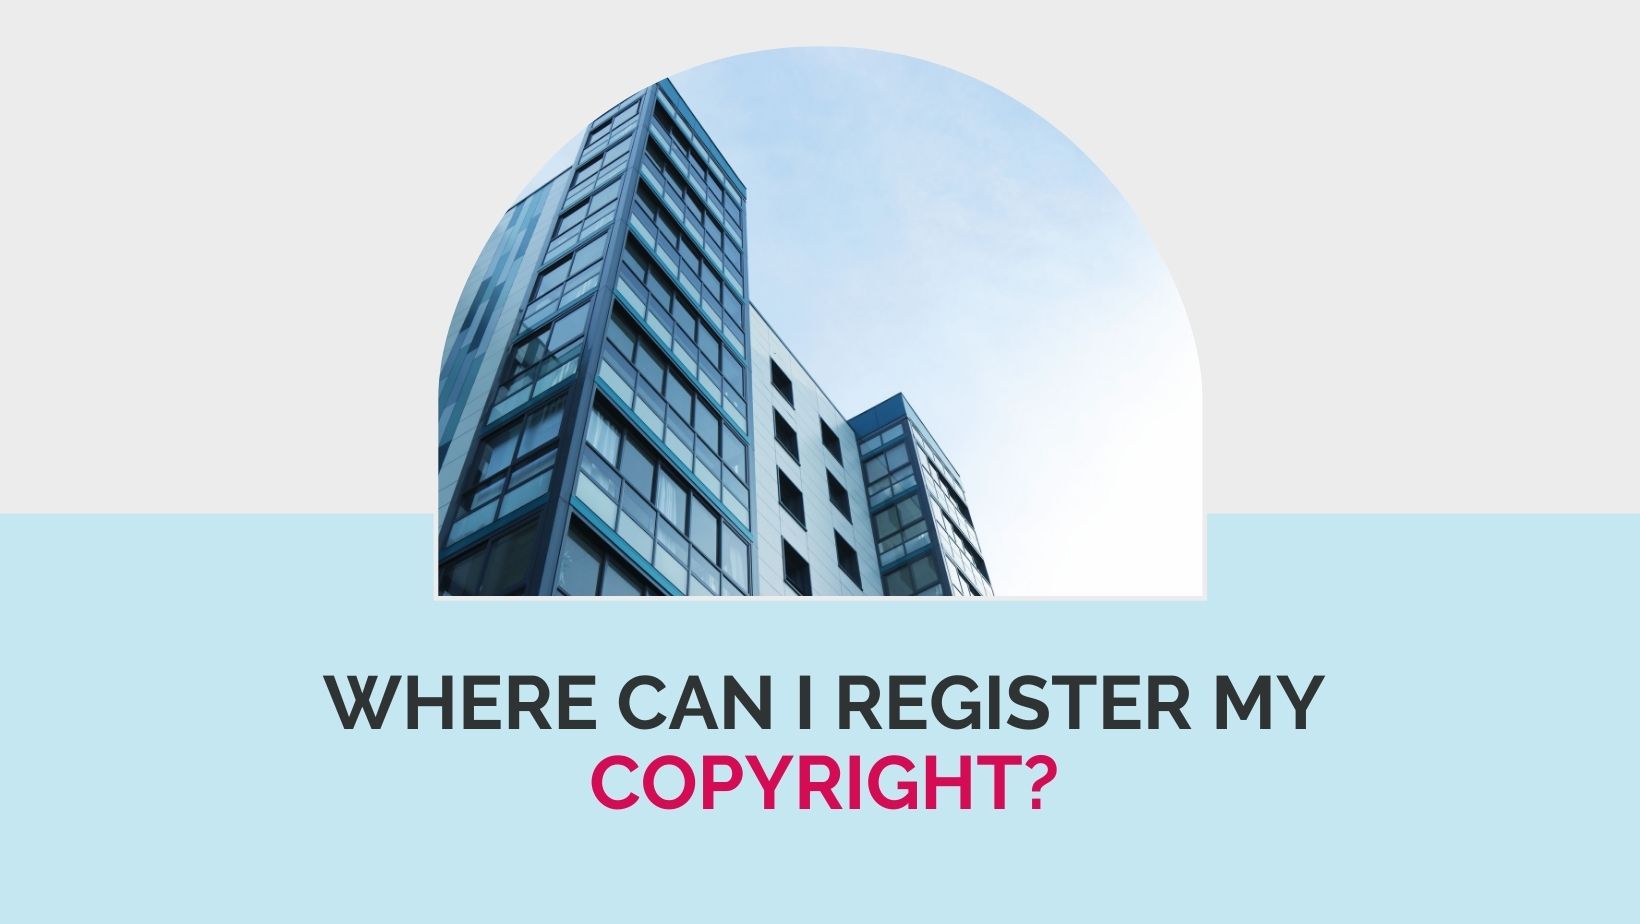 Where can I register my copyright?